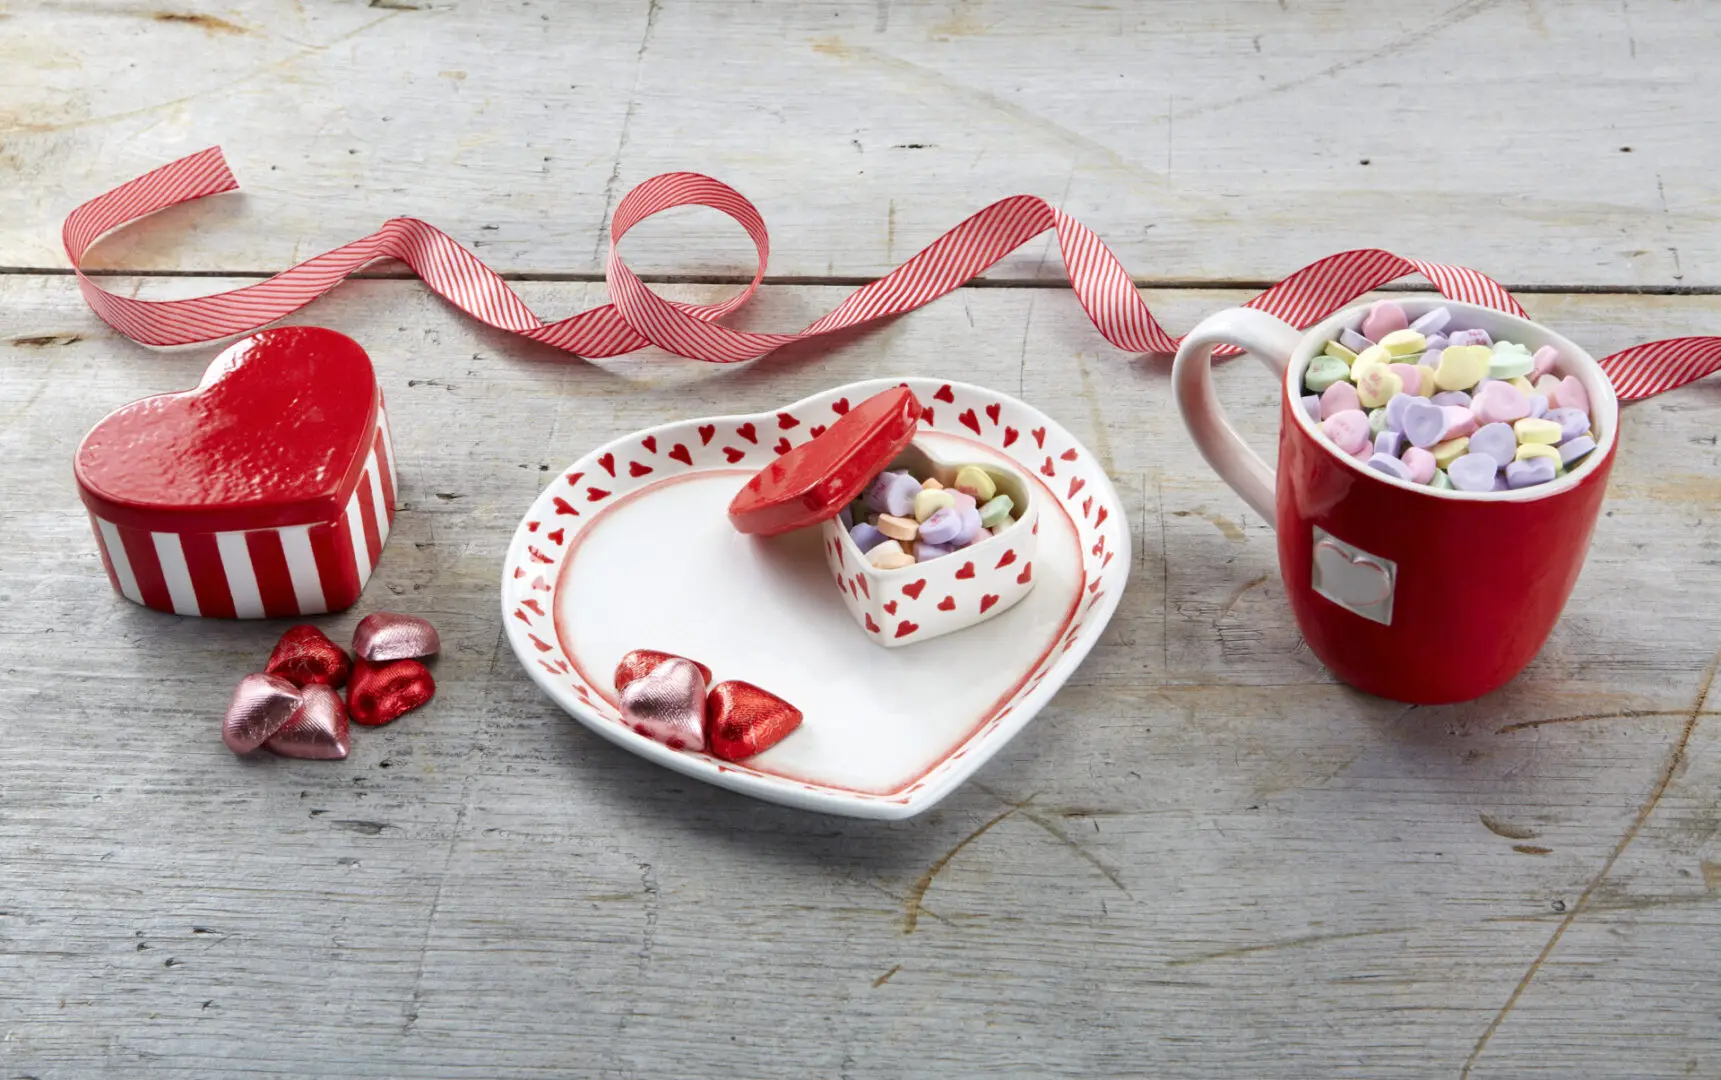 heart-shaped chocolates and mallows in a plate, a cup, and containers